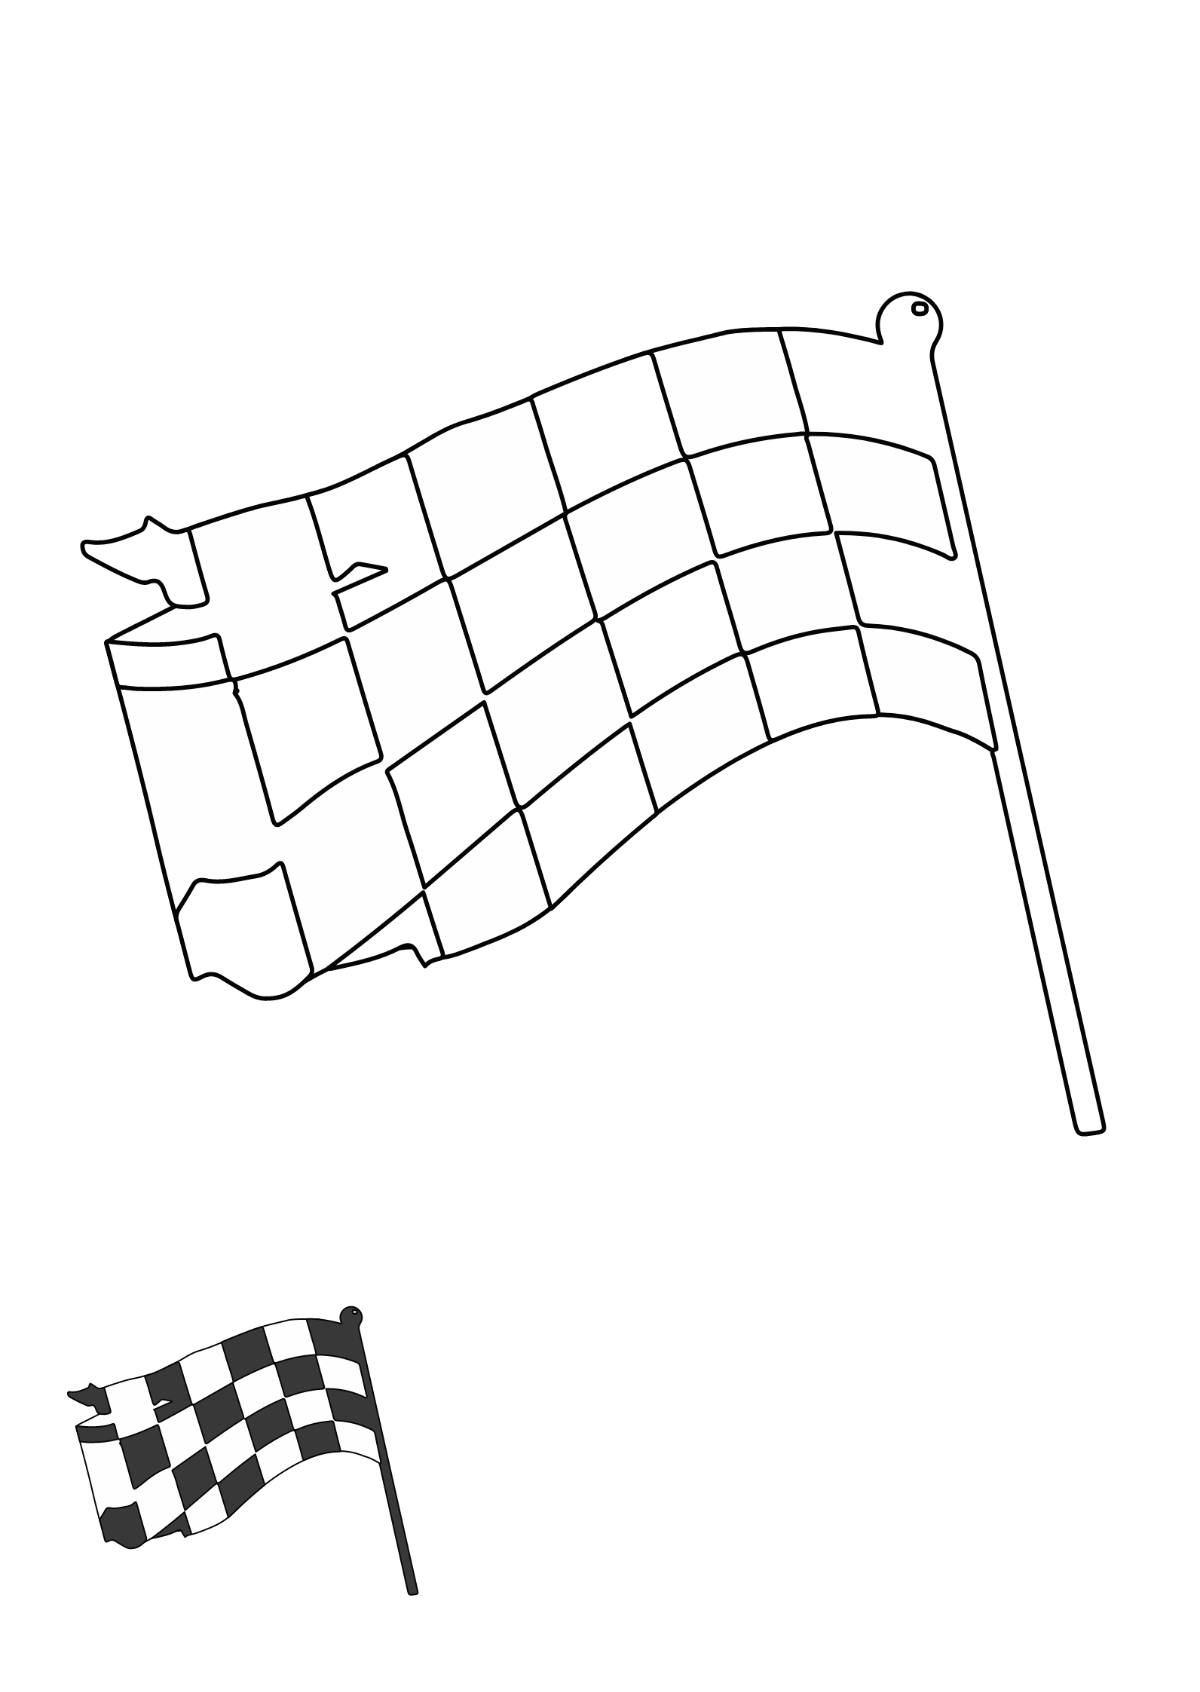 Ripped Checkered Flag coloring page Template